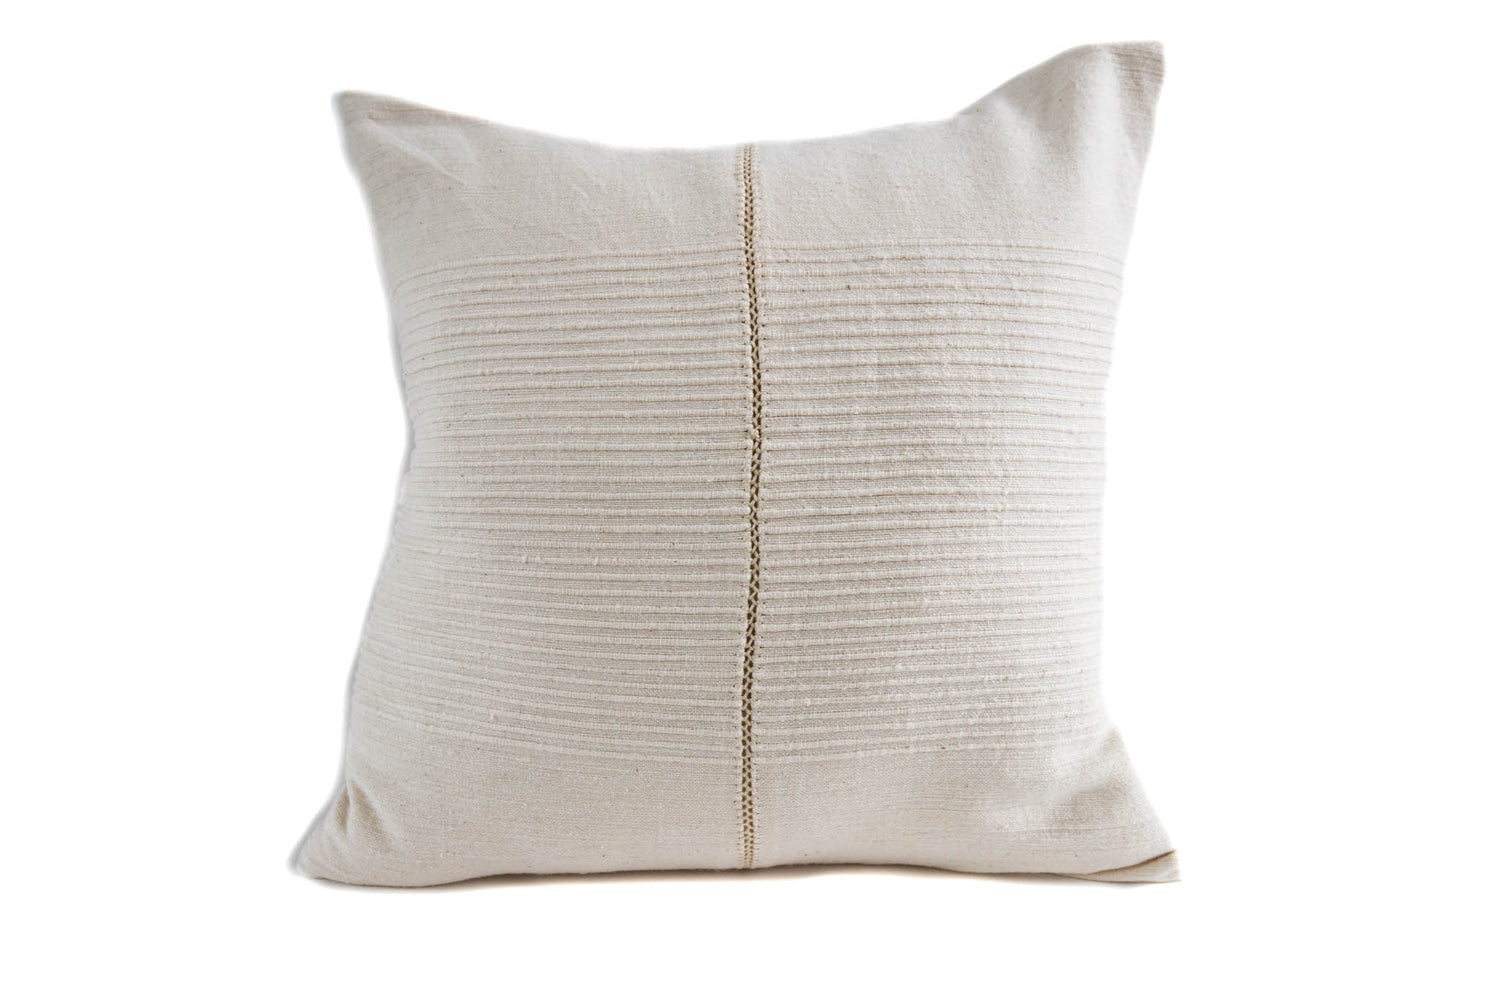 18" Riviera Hand-Stitched Cotton Throw Pillow Cover - Natural